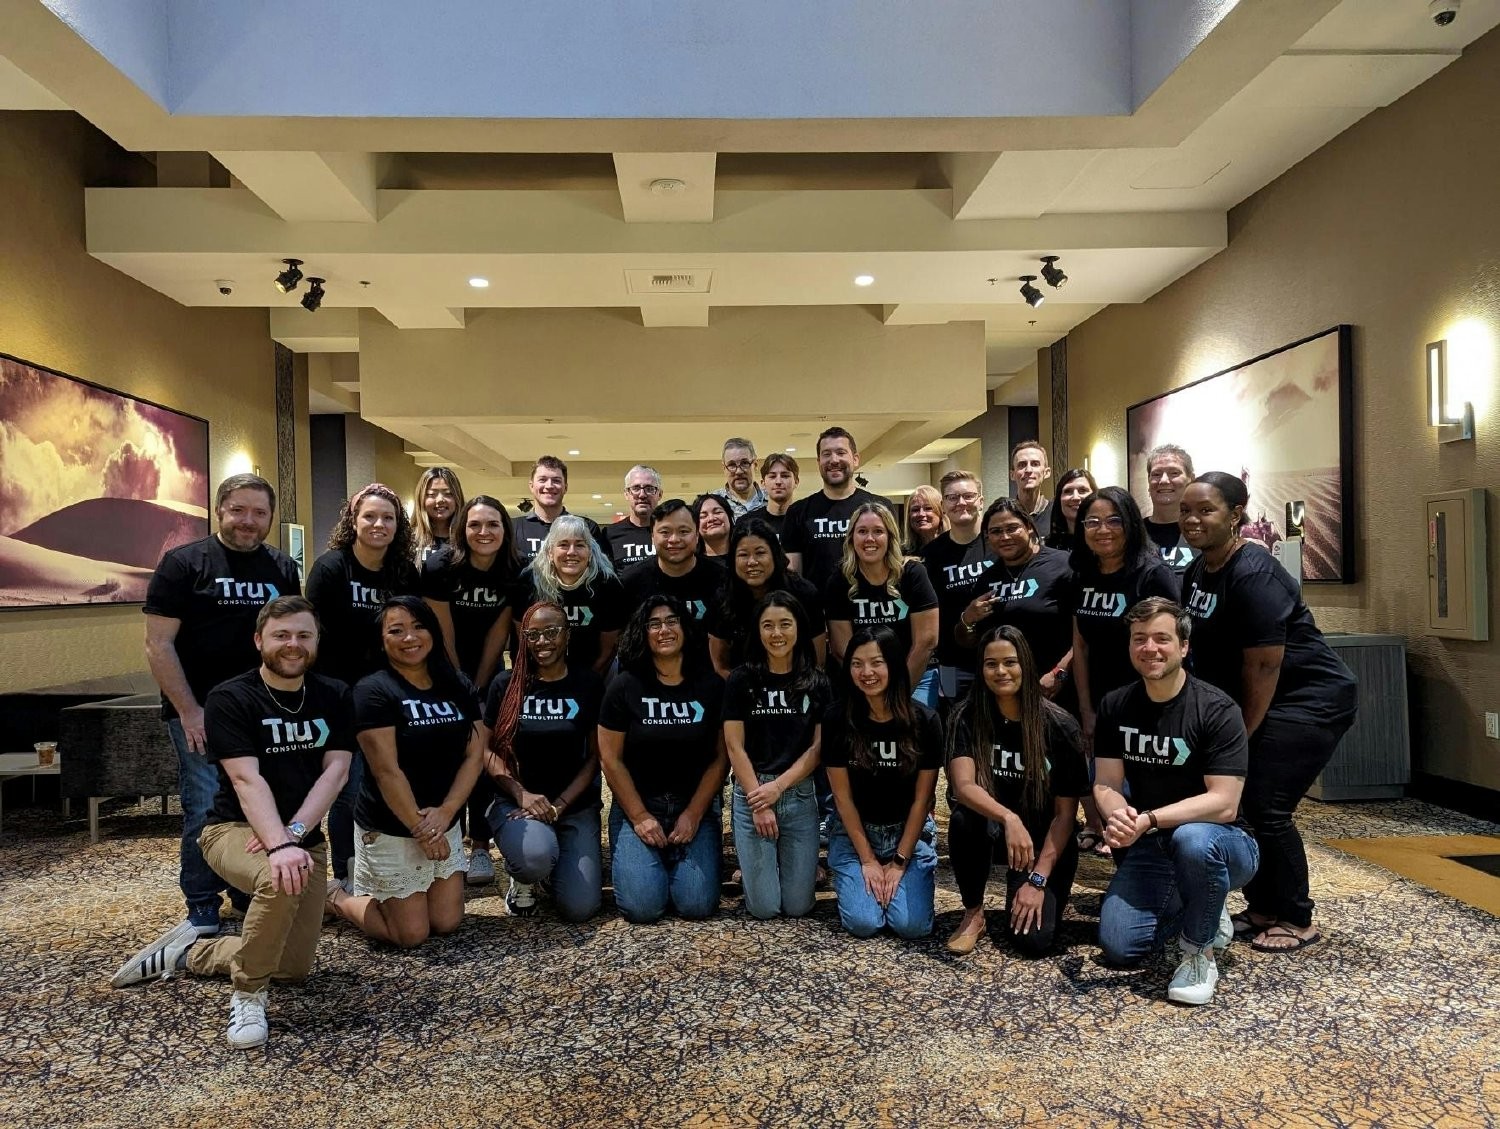 Team retreat in Las Vegas!  We have two retreats a year when we can be together, train, and connect!